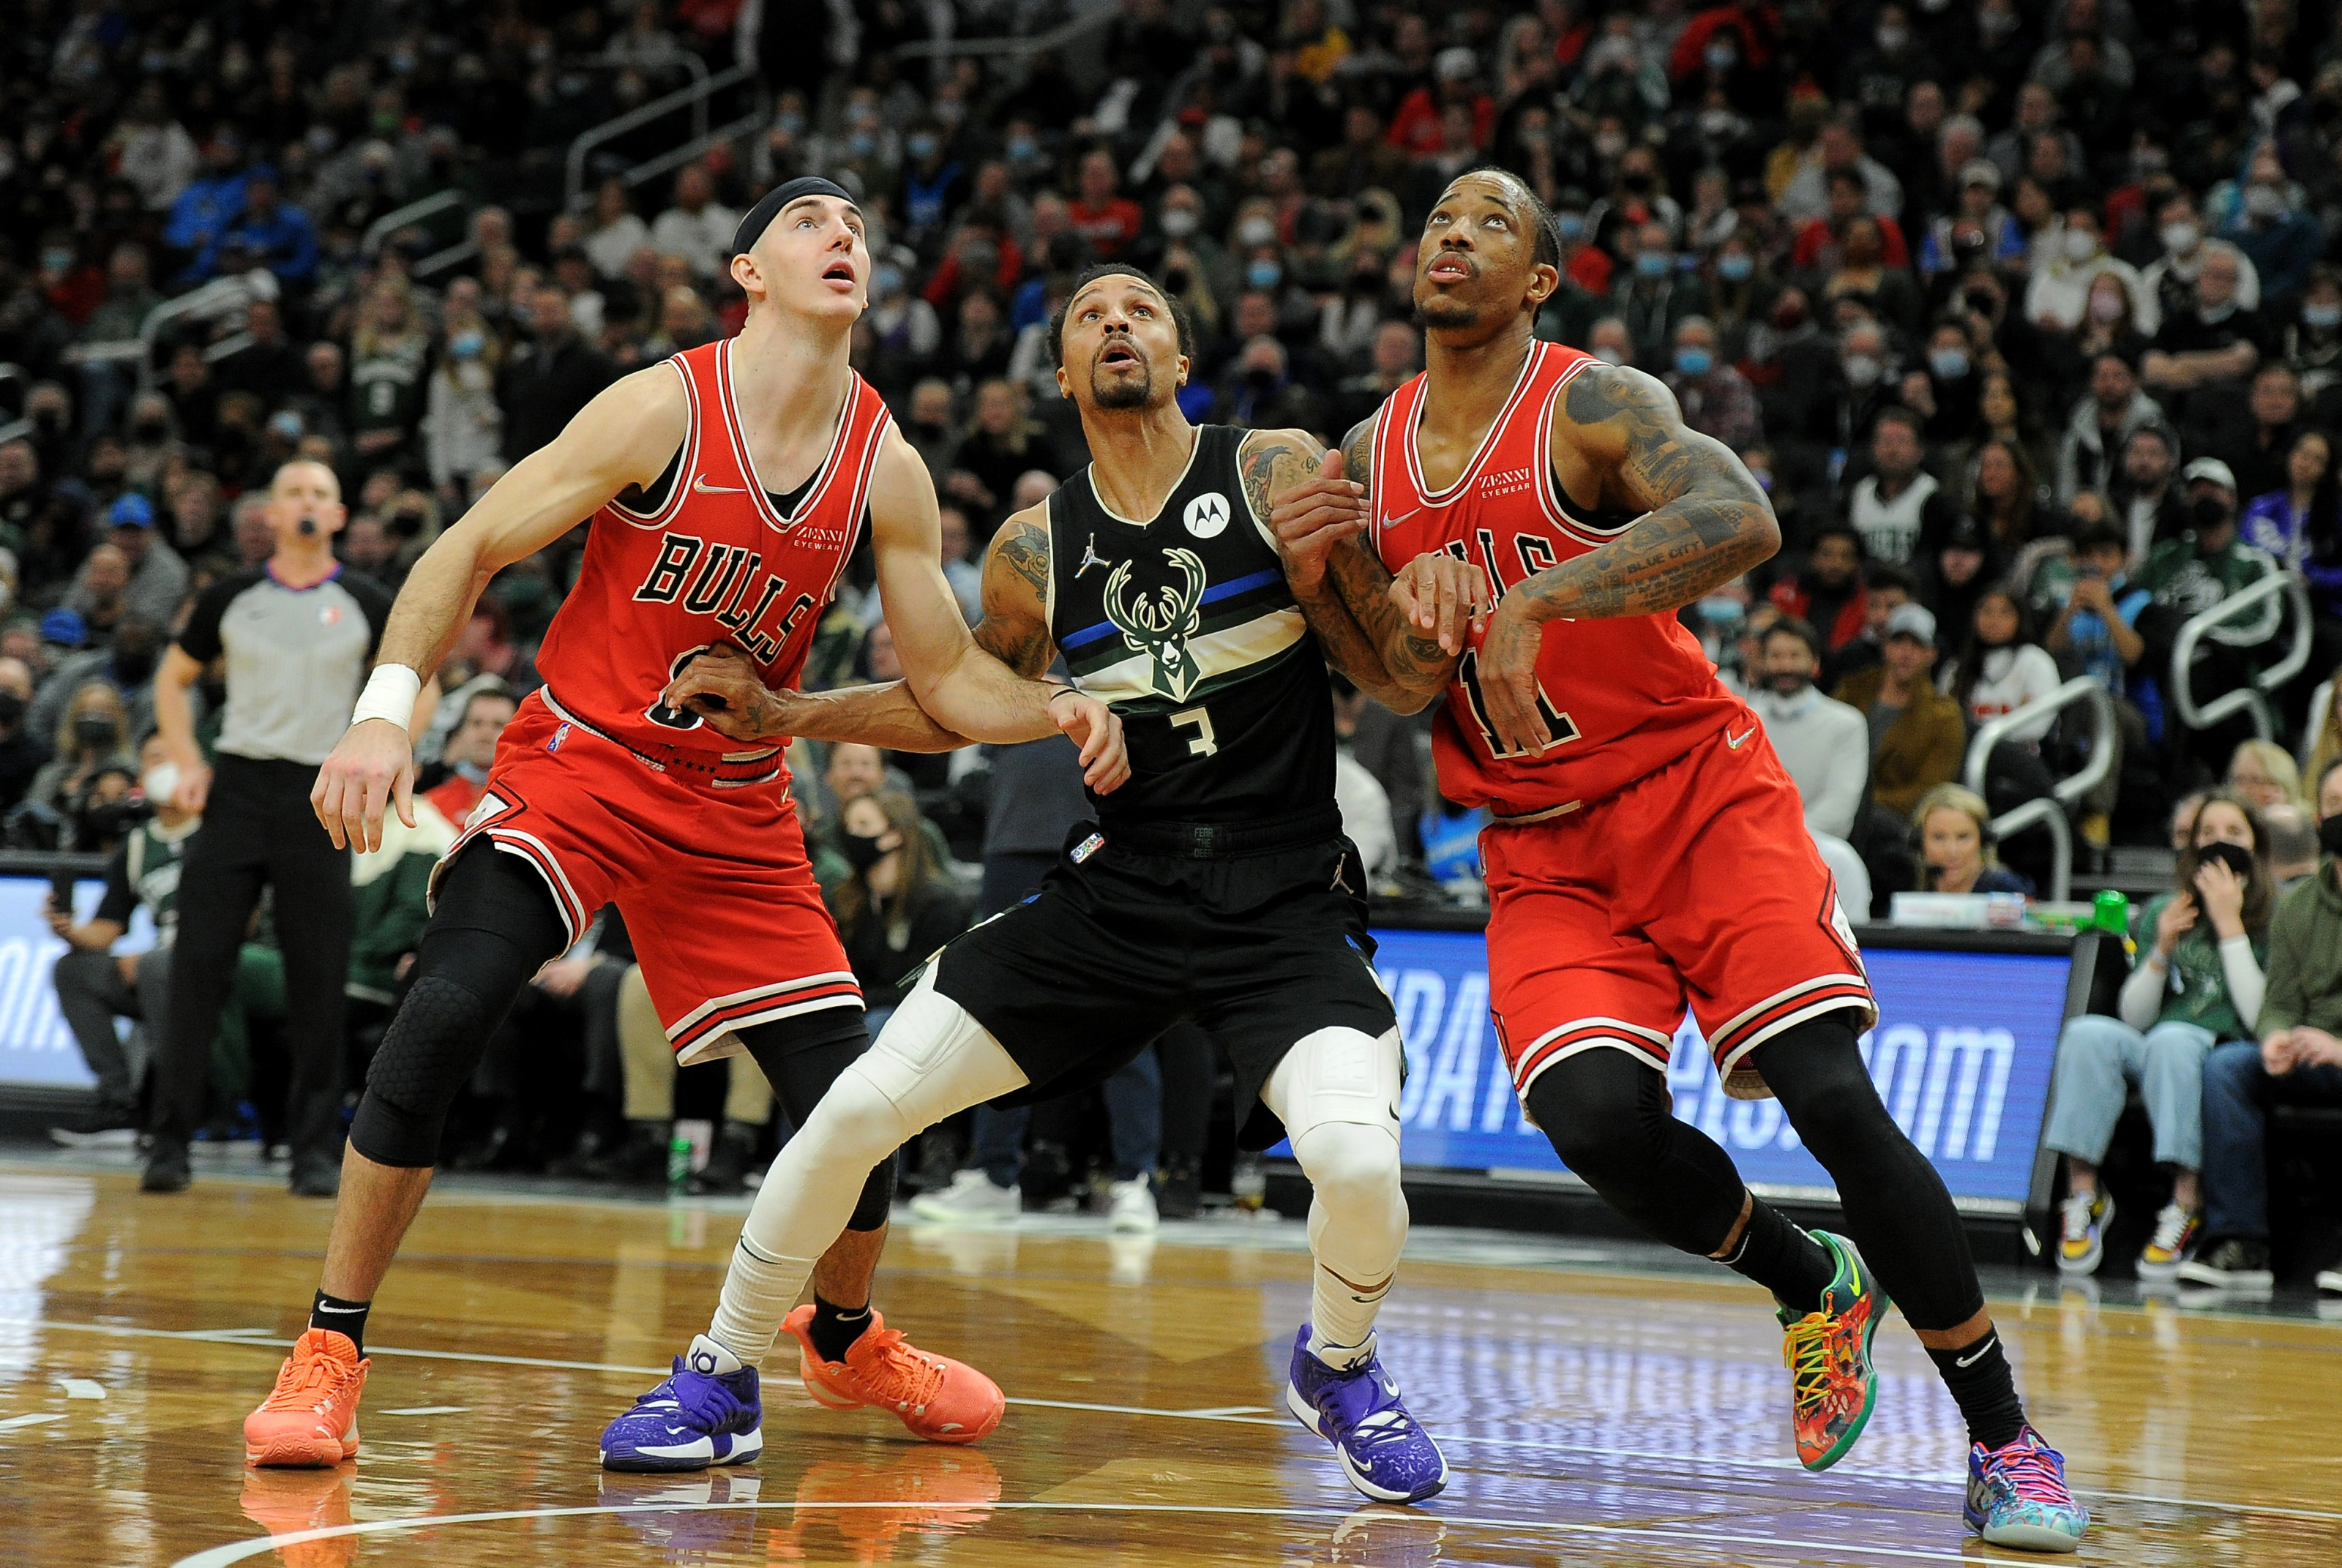 Bulls vs Bucks prediction, betting odds and TV channel for March 22